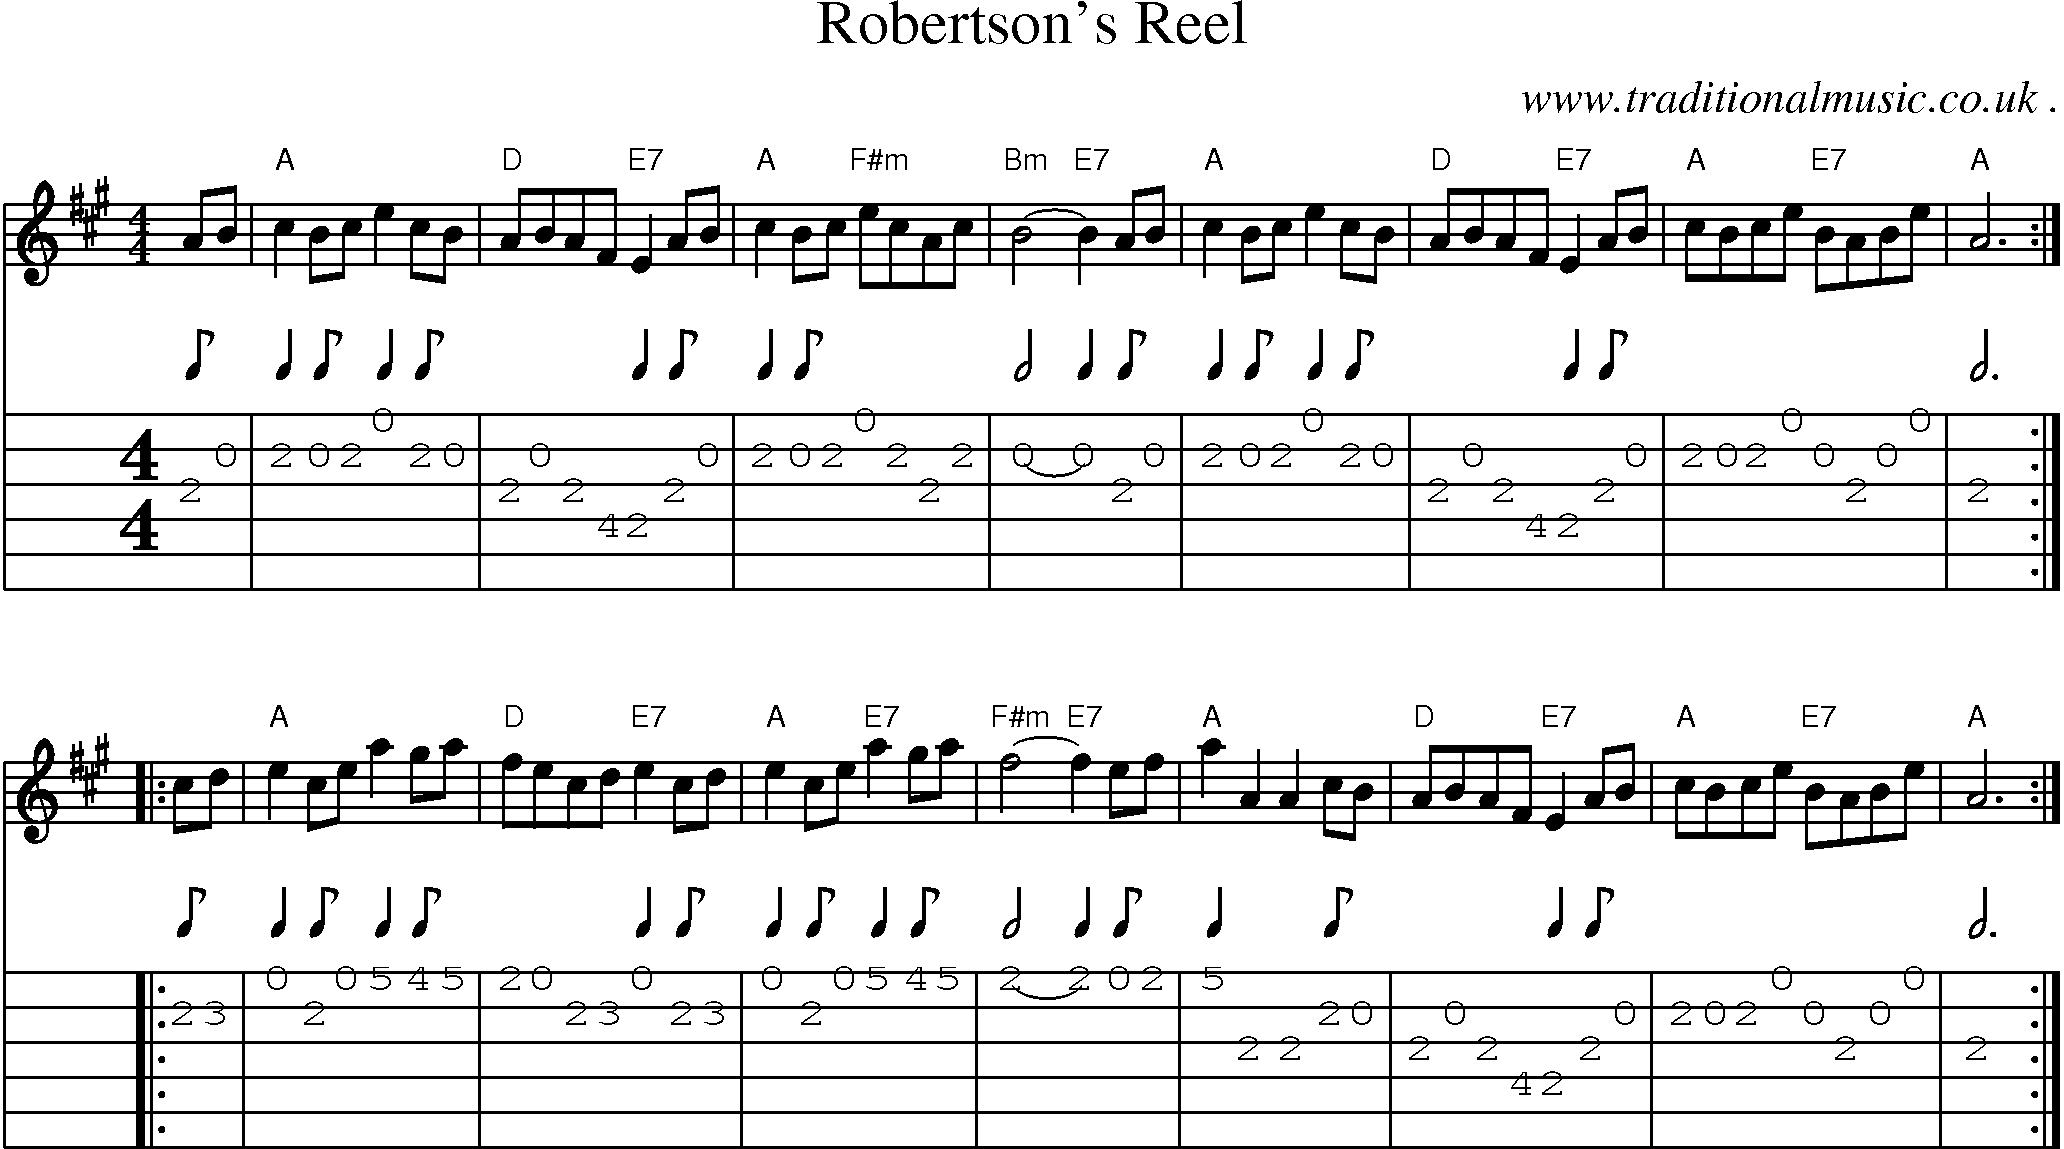 Music Score and Guitar Tabs for Robertsons Reel